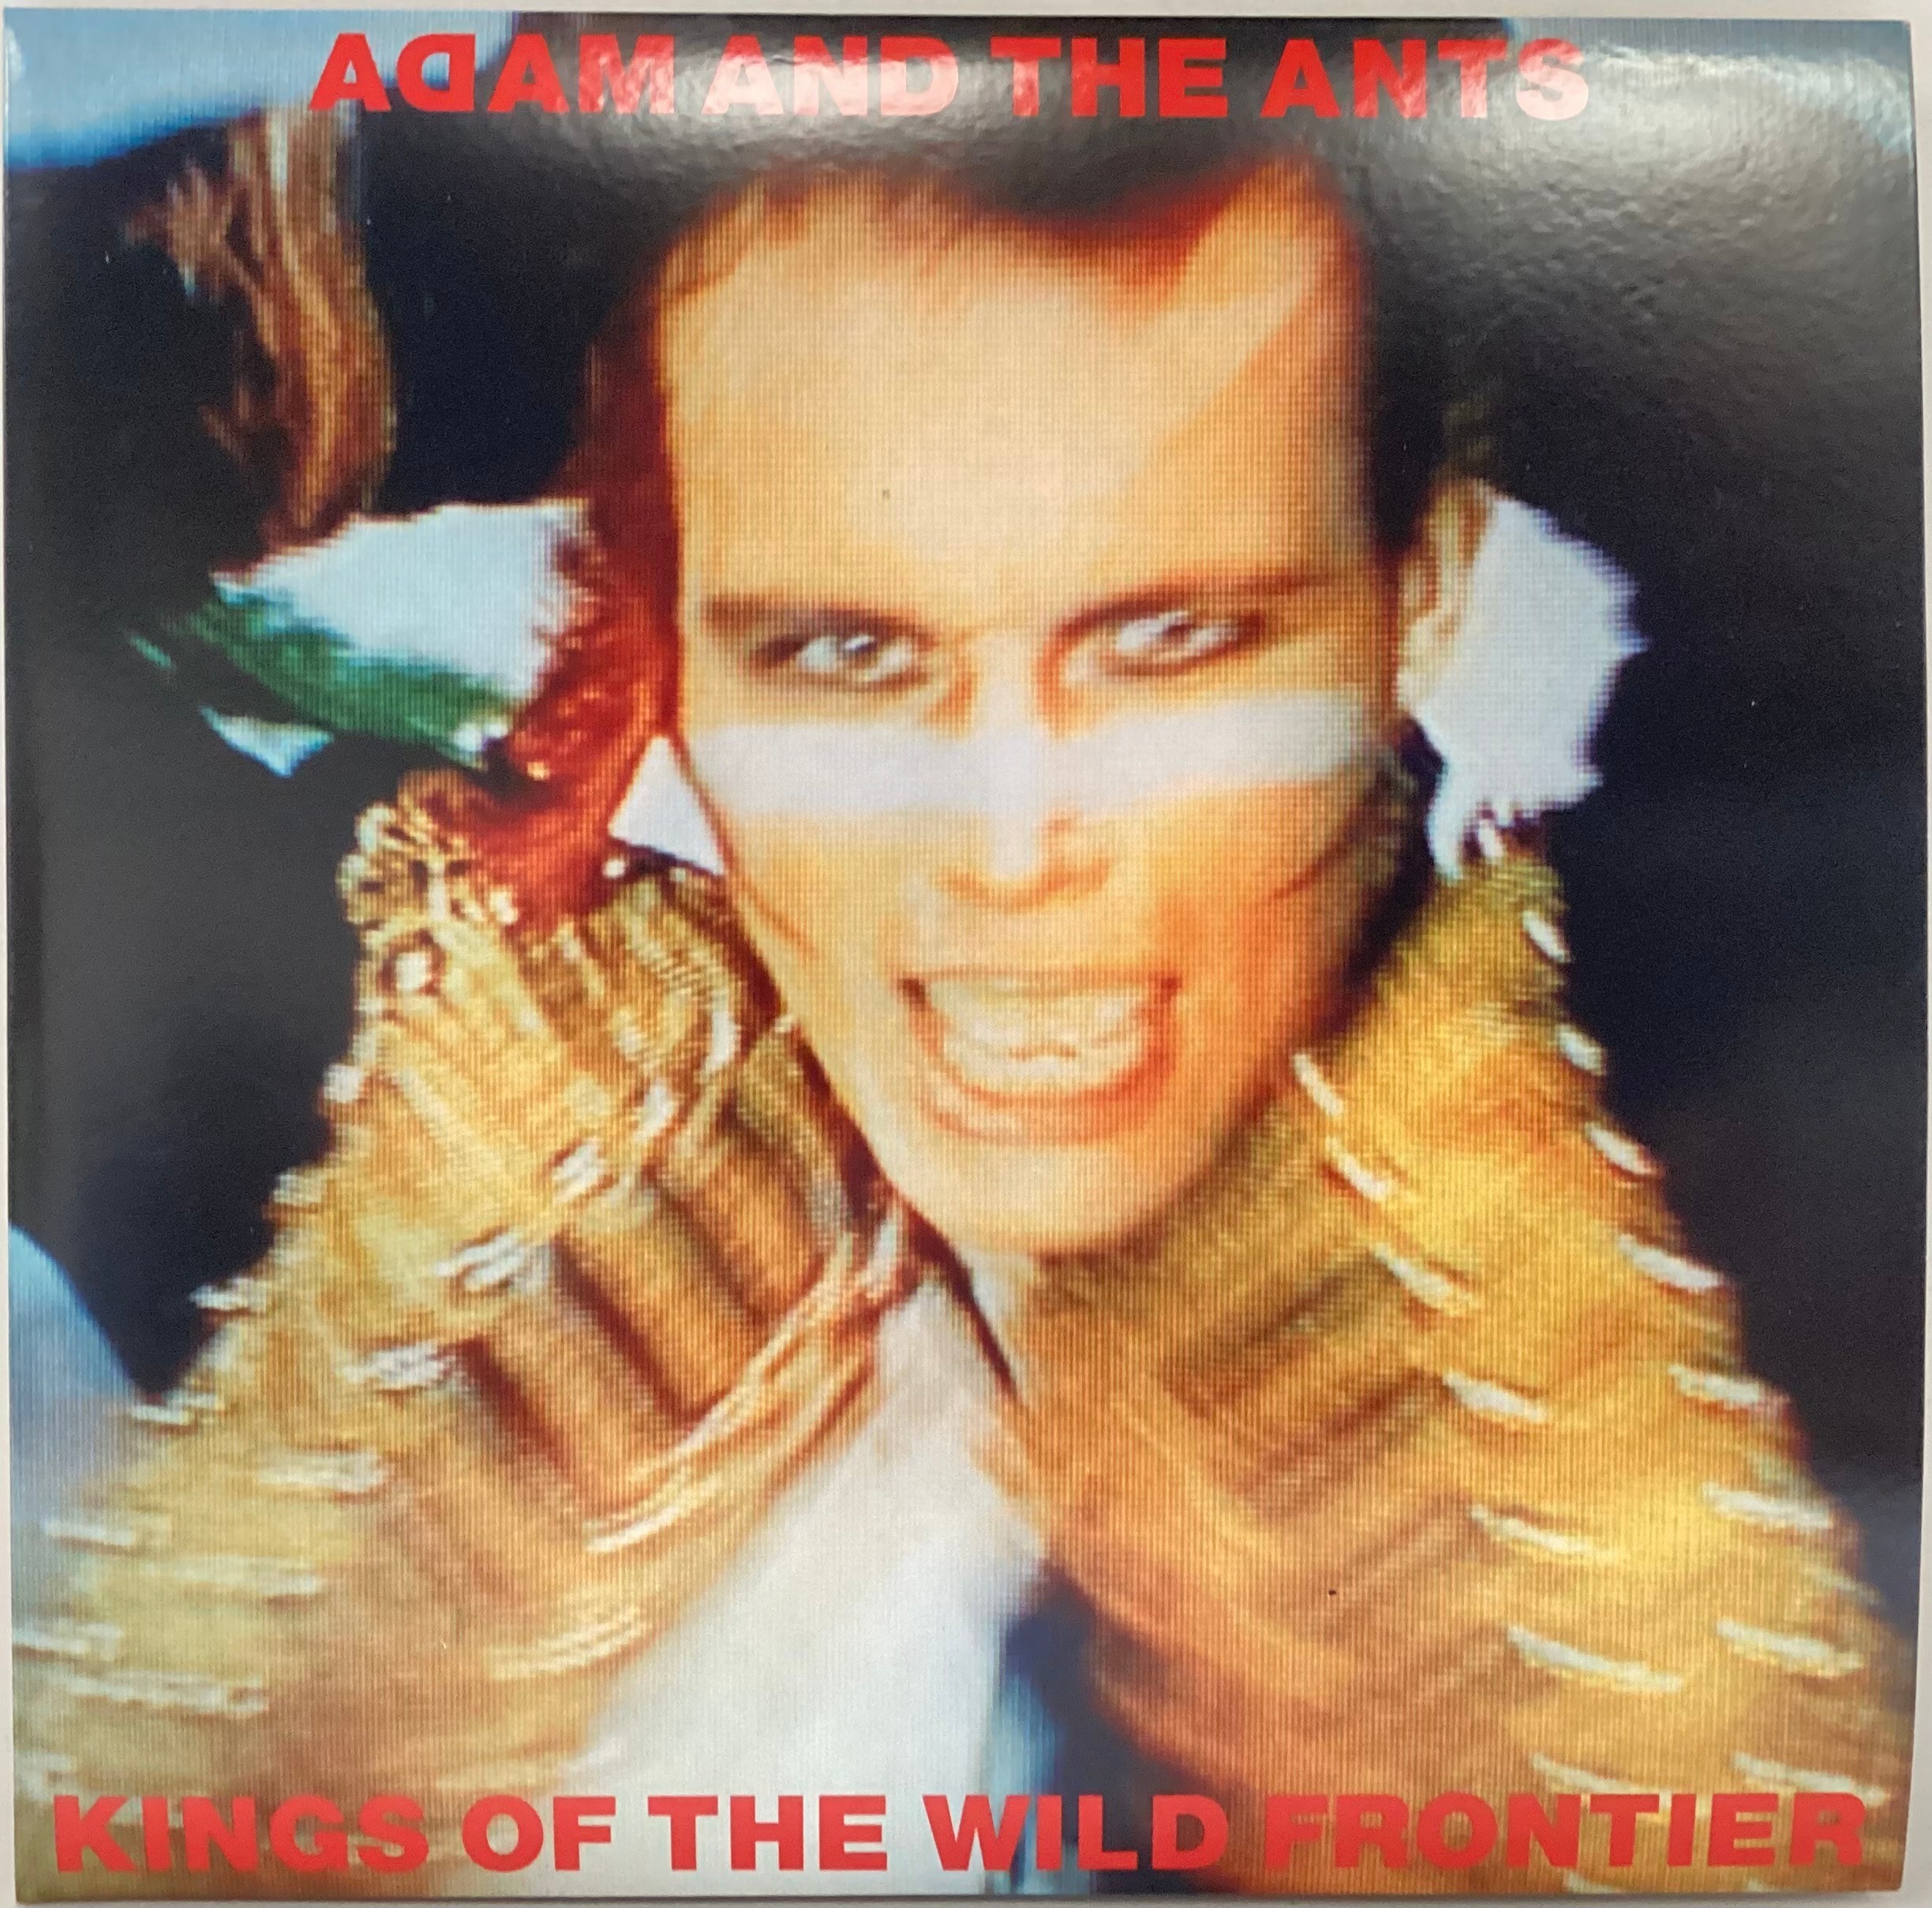 ADAM AND THE ANTS KINGS OF THE WILD FRONTIER 2016 DELUXE BOX SET GOLD VINYL. Vinyl + Cd Box Set - Image 5 of 10